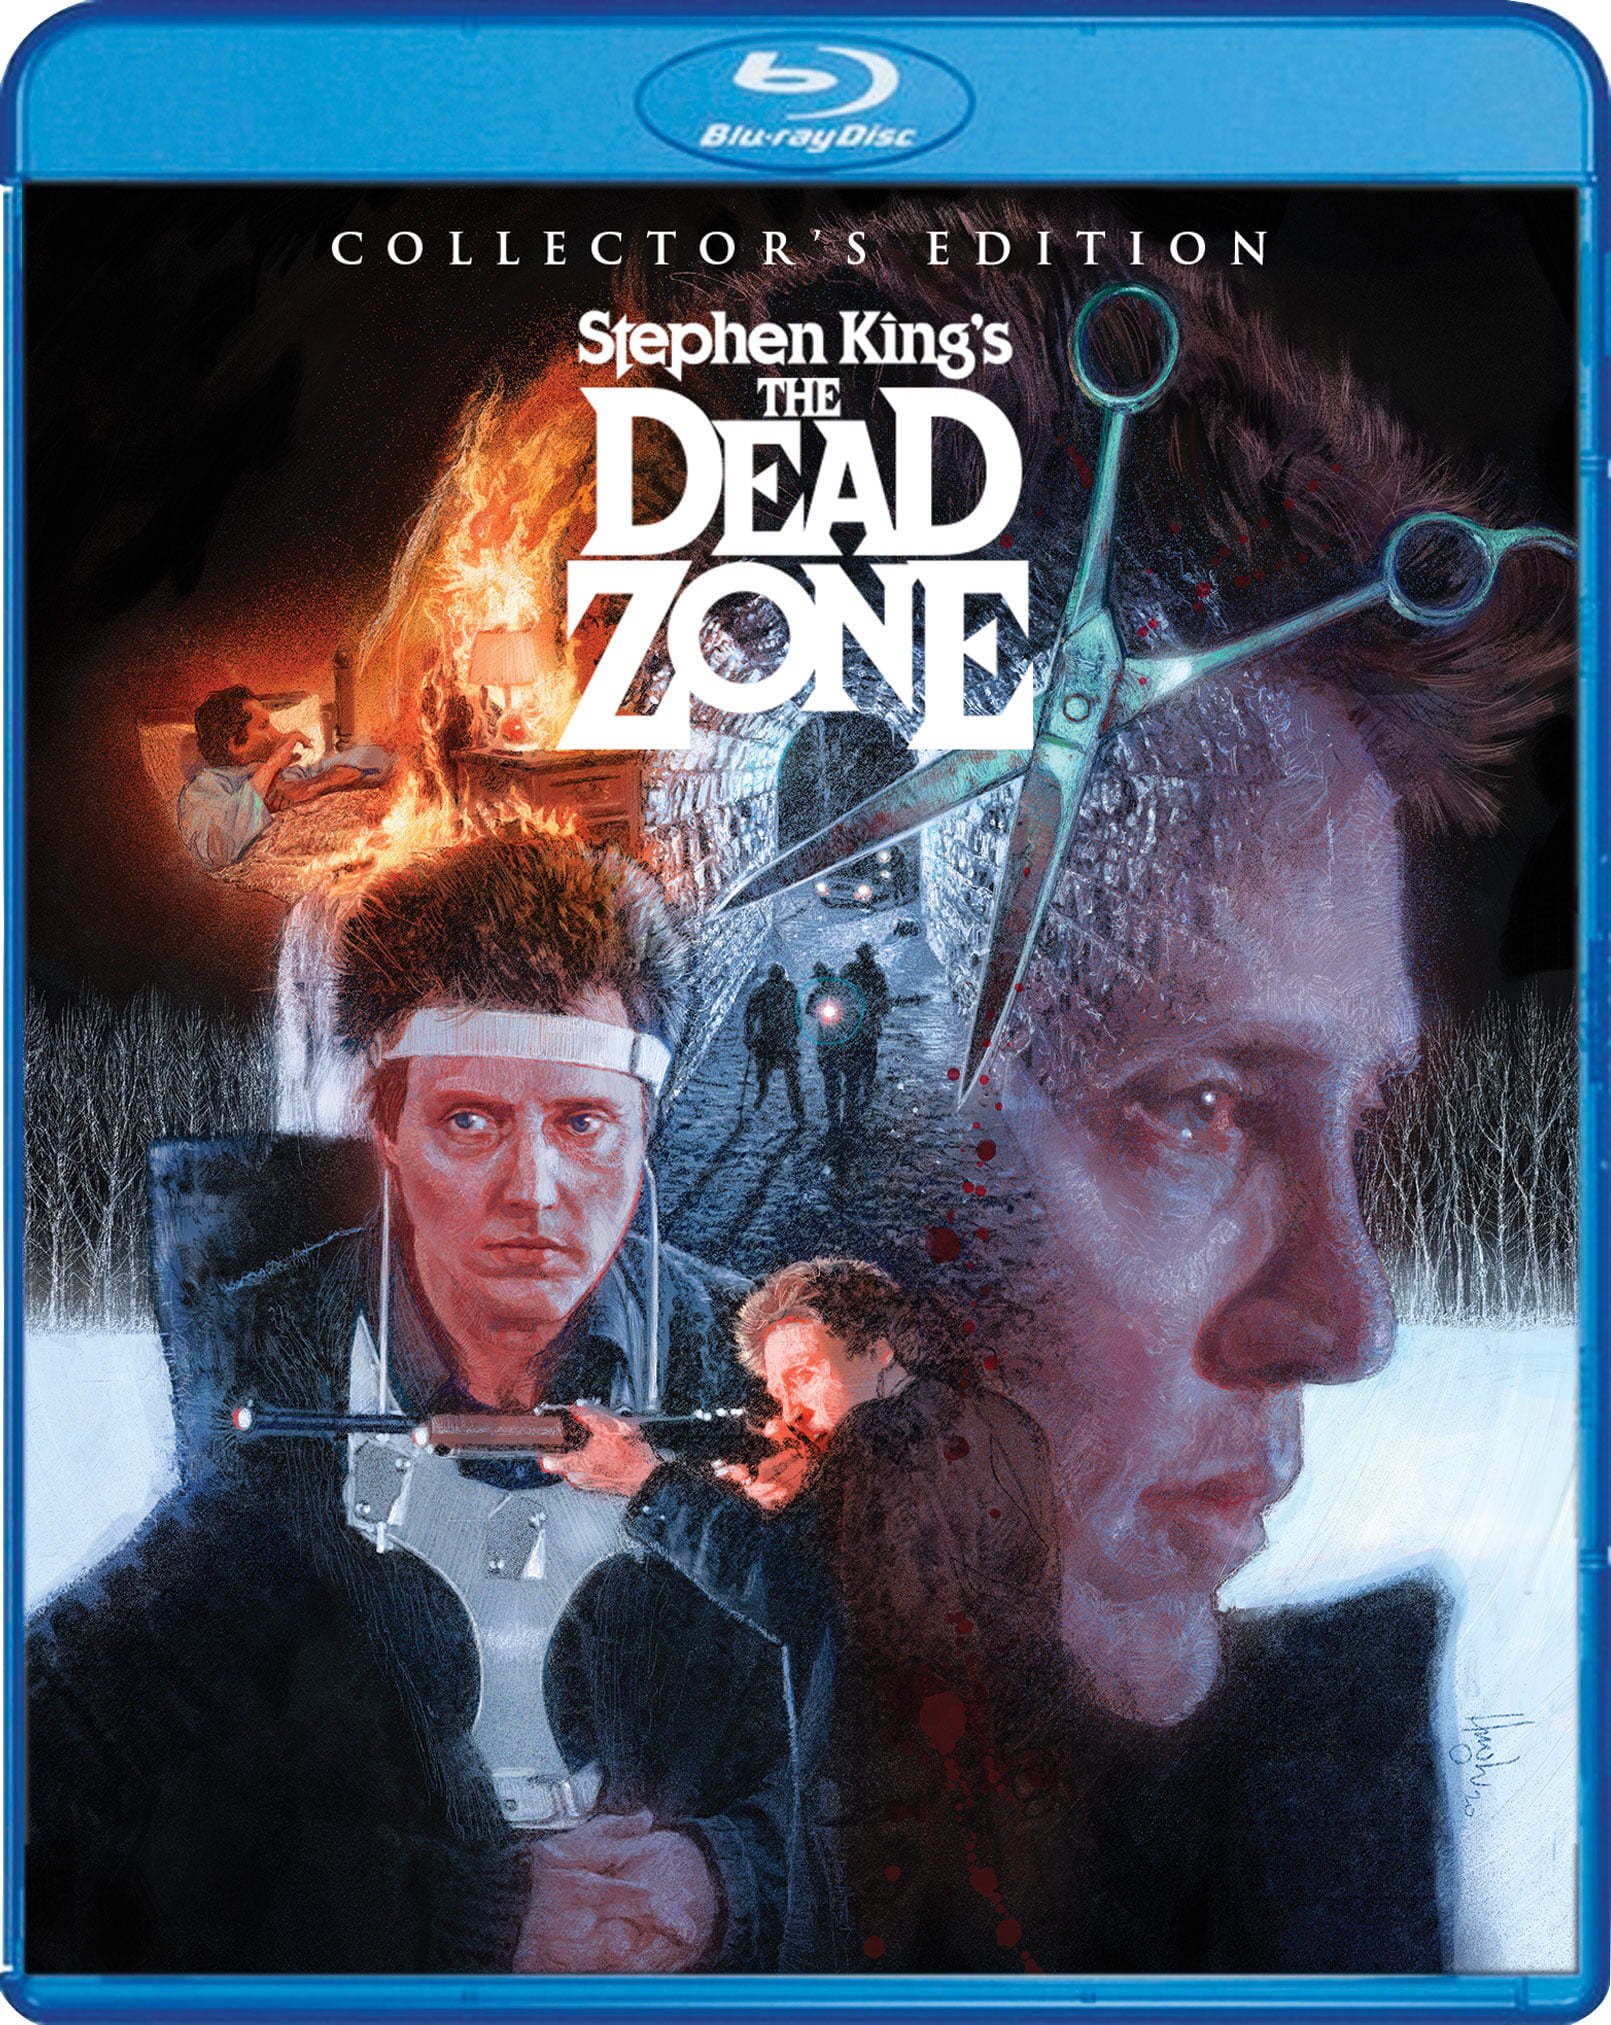 The Dead Zone Blu-ray Review (Scream Factory) - Cultsploitation